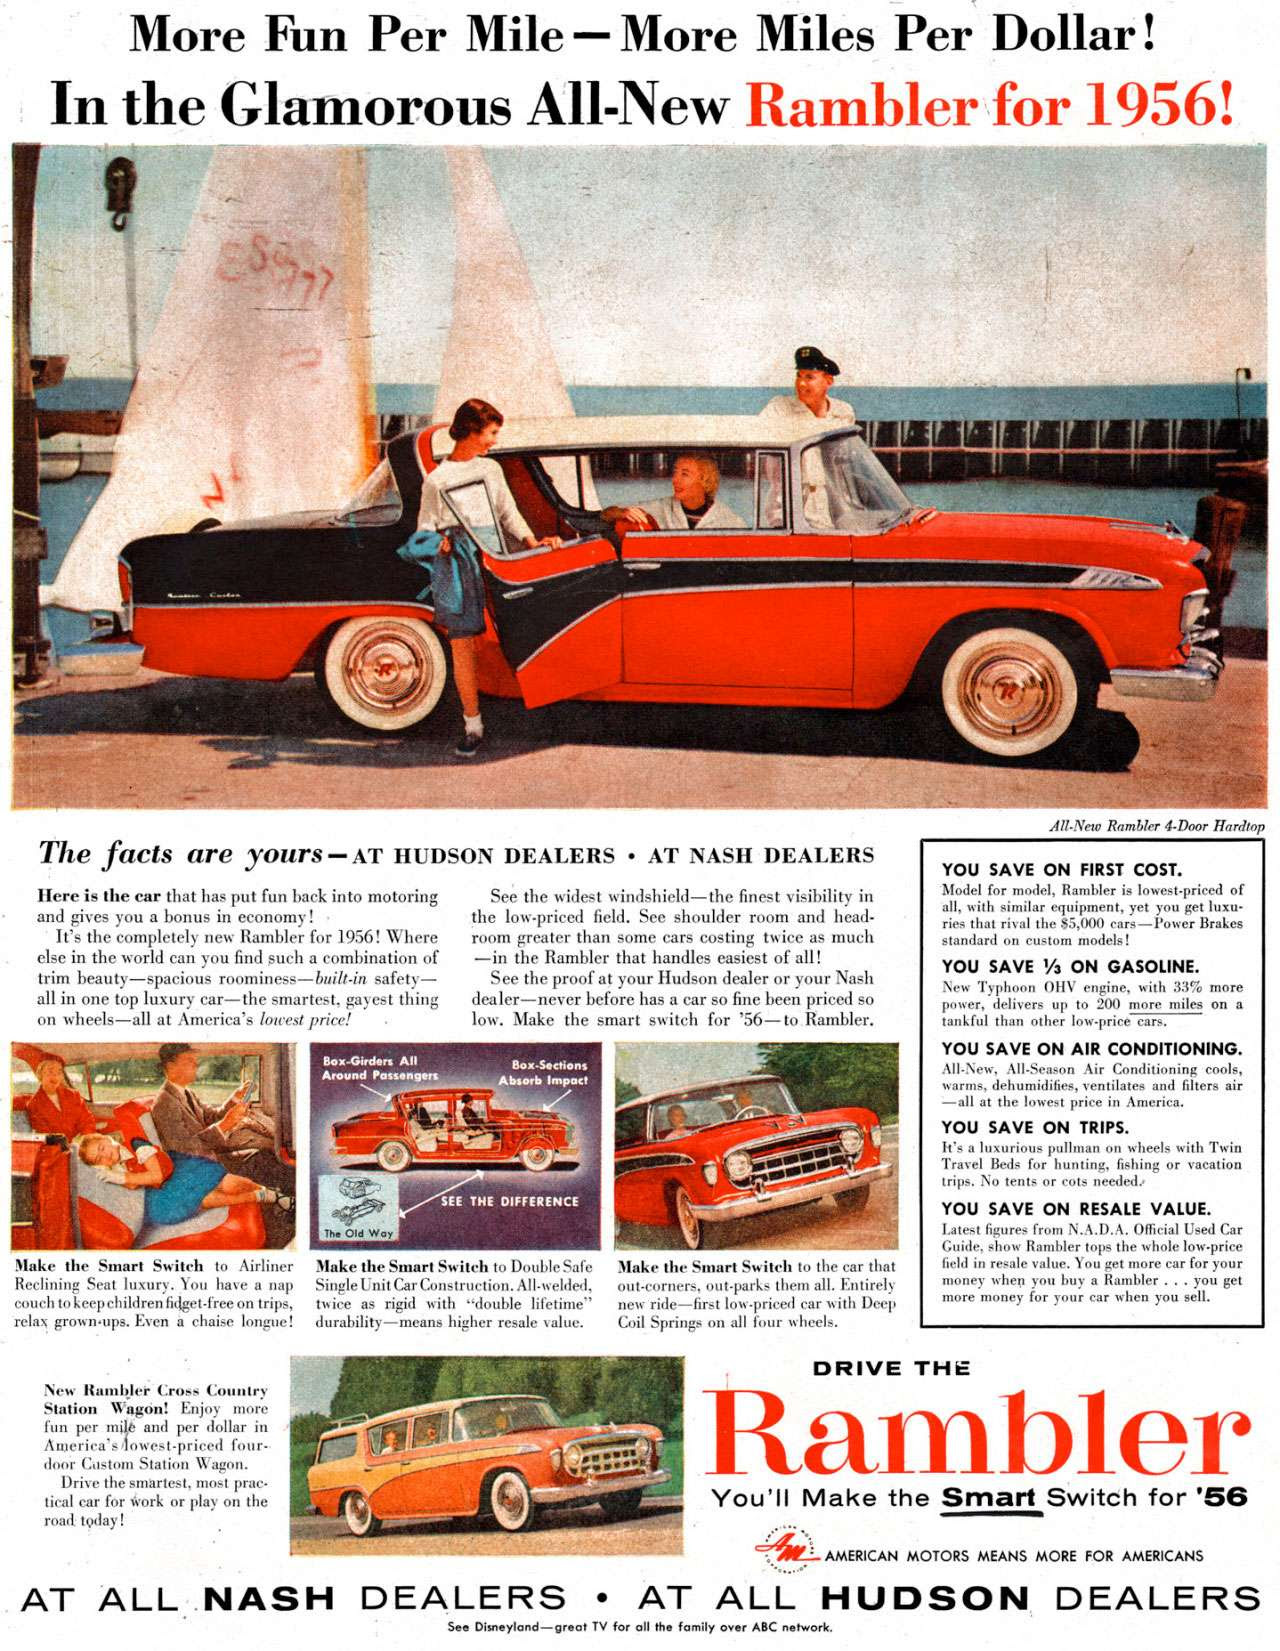 More Fun Per Mile—More Miles Per Dollar! In the Glamorous All-New Rambler for 1956! 
The facts are yours — AT HUDSON DEALERS • AT NASH DEALERS 
Here is the ear that has put fun back into motoring • and gives you a bonus in economy! It's the completely new Rambler for 1956! Where else in the world can you find such a combination of trim beauty—spacious roominess—built-is safety—all in one top luxury car—the smartest, gayest thing on wheels—all at America's lowest price! . 
See the widest windshield—the finest visibility in the low-priced field. See shoulder room and head-room greater than some cars costing twice as much —in the Rambler that handles easiest of all! See the proof at your Hudson dealer or your Nash dealer—never before has a car so fine been priced so low. Make the smart switch for '56—to Rambler. 
Make the Smart Switch to Airliner Make the Smart Switch to Double Safe Make the Smart Switch to the car that Reclining Seat luxury. You have a nap Singlelinit CarConstruction. All-welded, out-corners, out-parks them all. Entirely couch to keep children fidget-free on trips, twice as rigid with 'double lifetime' new ride—first low.priced car with Deep relax grown•ups. Even it chaise longue! durability—means higher resale value. Coil Springs on all four wheels. 
New Rambler Cross Country Station Wagon! Enjoy more fun per milt and per dollar in America's 4owest-priced four-door Custom Station Wagon. Drive the smartest, most prac-tical car for Work or play on the road. today! 
All-New Rambler 4-Door Hardtop 
YOU SAVE ON FIRST COST. Model for model, Rambler is lowestpriced of all, with similar equipment, yet you get luxu-ries that rival the $5,000 cars—Power Brakes standard on custom models! YOU SAVE Ya ON GASOLINE. New Typhoon 01-1V engine, with 33% more Mefri:1 deliverst h:lr) to 200emore on YOU SAVE ON AIR CONDITIONING. All-New, All-Season Air Conditioning cools, warms, dehumidifies, ventilates and filters air —all at the lowest price in America. YOU SAVE ON TRIPS. It's a luxurious pullinan on wheels with Twin Travel Beds for hunting, fishing or vacation trips. No tents or cots needed: YOU SAVE ON RESALE VALUE. Latest figures from N.A.D.A. Official Used Car Guide, show Rambler tops the whole low-price field in resale value. You get more car for your money cher you buy a Rambler . . . you get more money for your car when you sell. 
DRIVE THE 
Rambler 
You'll Make the Smart Switch for '56 
4:4Ir- AMERICAN MOTORS MEANS MORE FOR AMERICANS 
AT ALL NASH DEALERS • AT ALL HUDSON DEALERS 
See Disneyland—great TV for all Me family over ABC network.